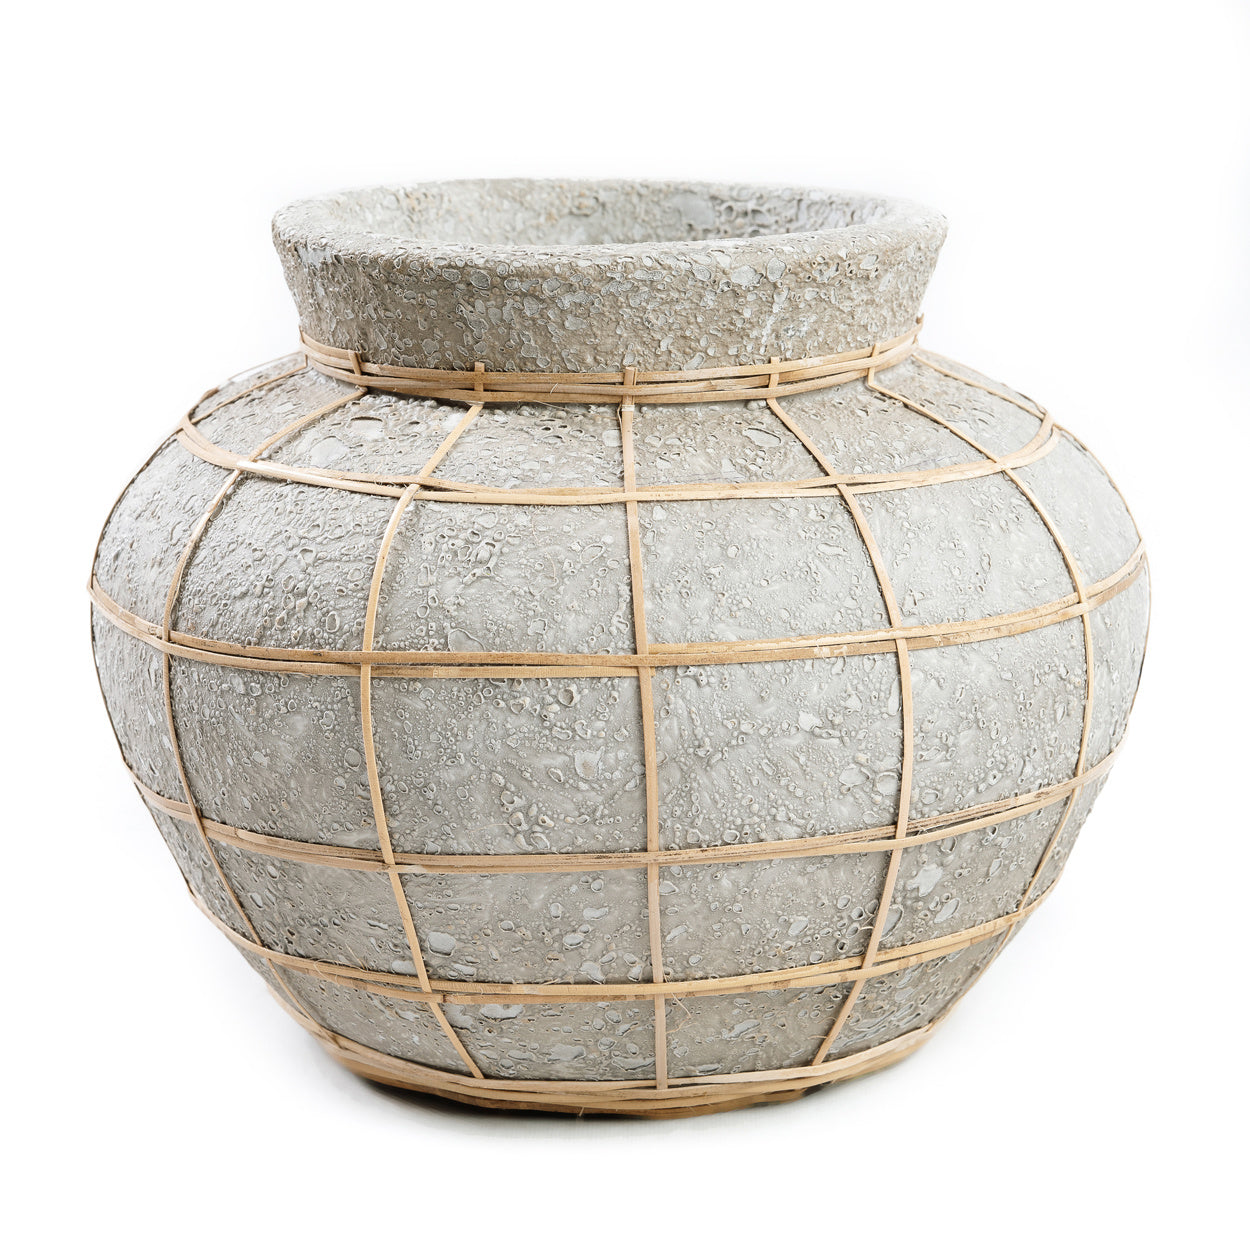 THE BELLY Vase - Concrete Natural S